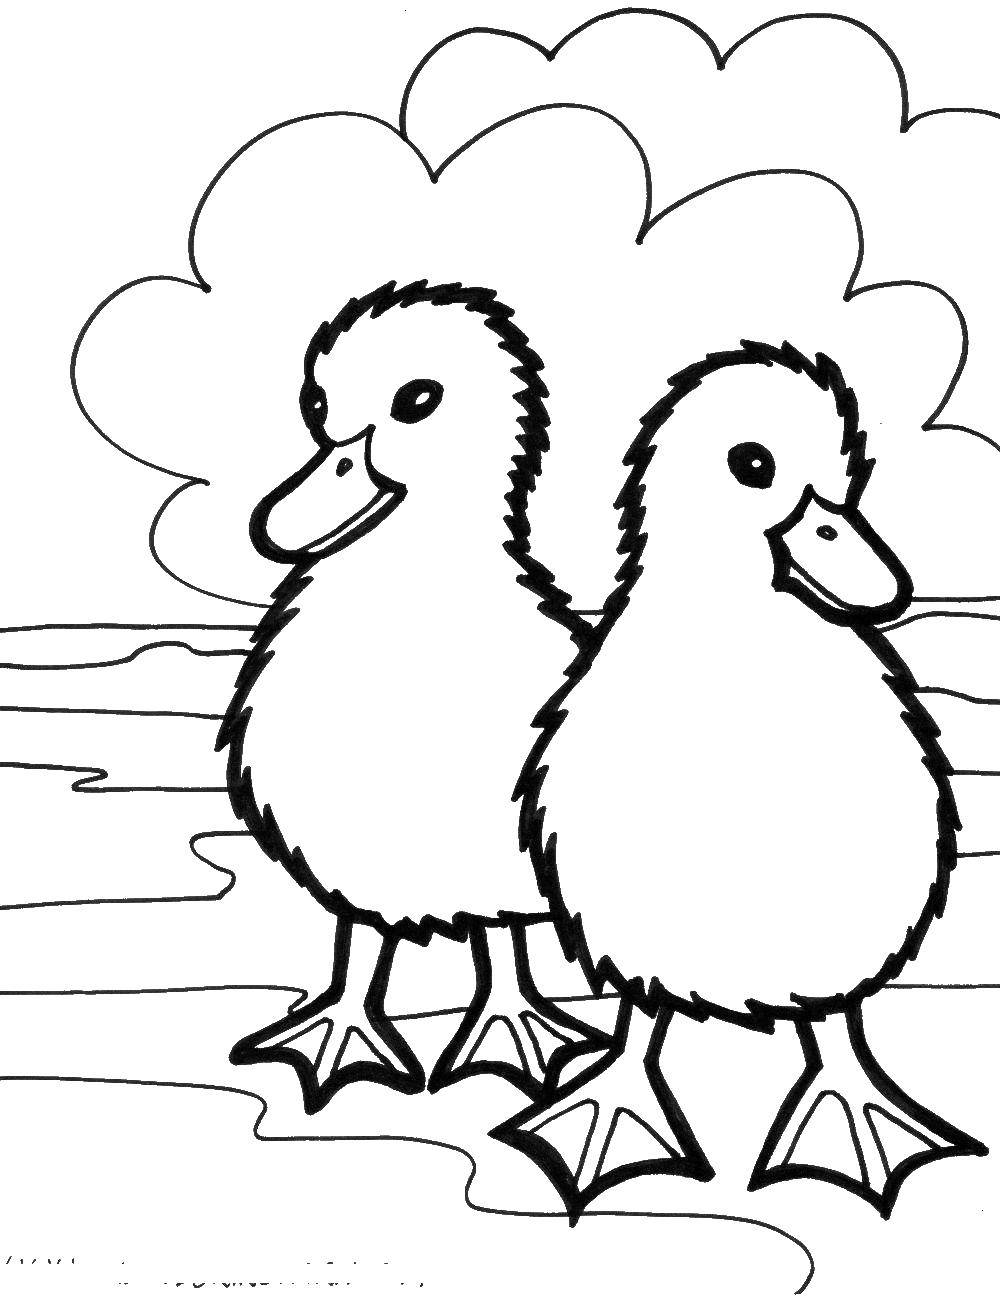 Coloring Ducklings. Category animals. Tags:  ducks, ducklings, birds.